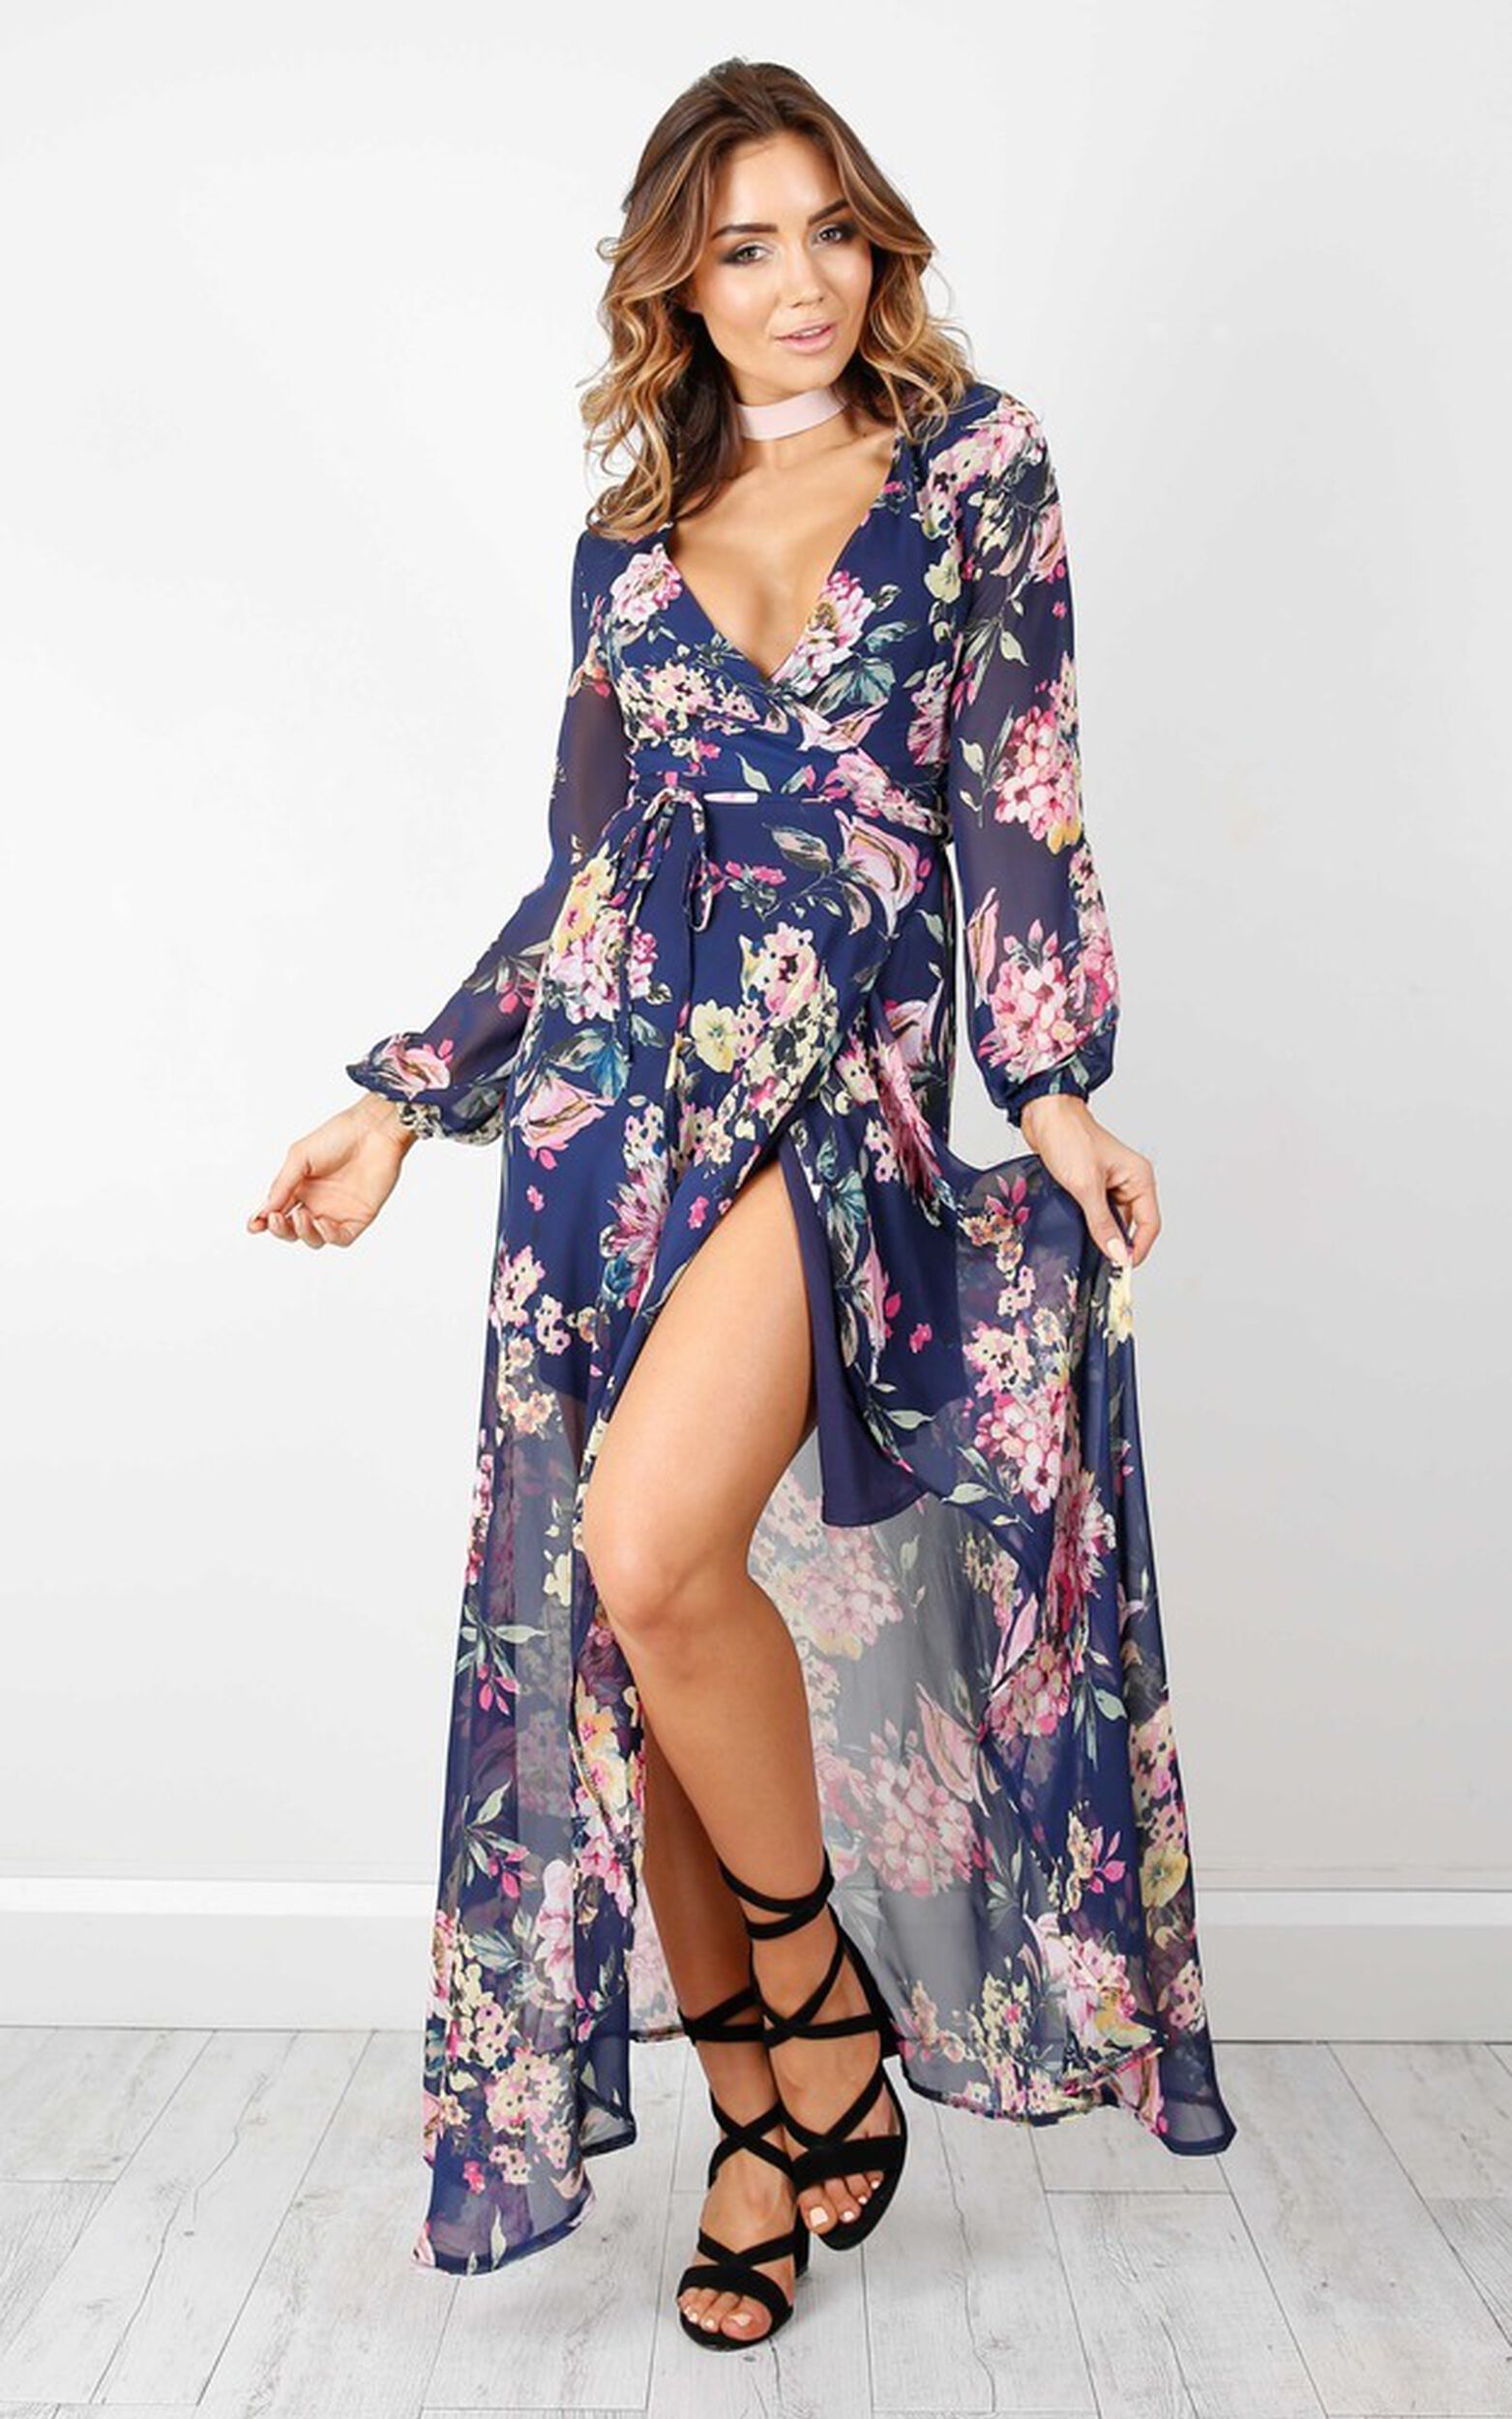 Autumn Falls maxi dress in navy floral  - 6 (XS), NVY1